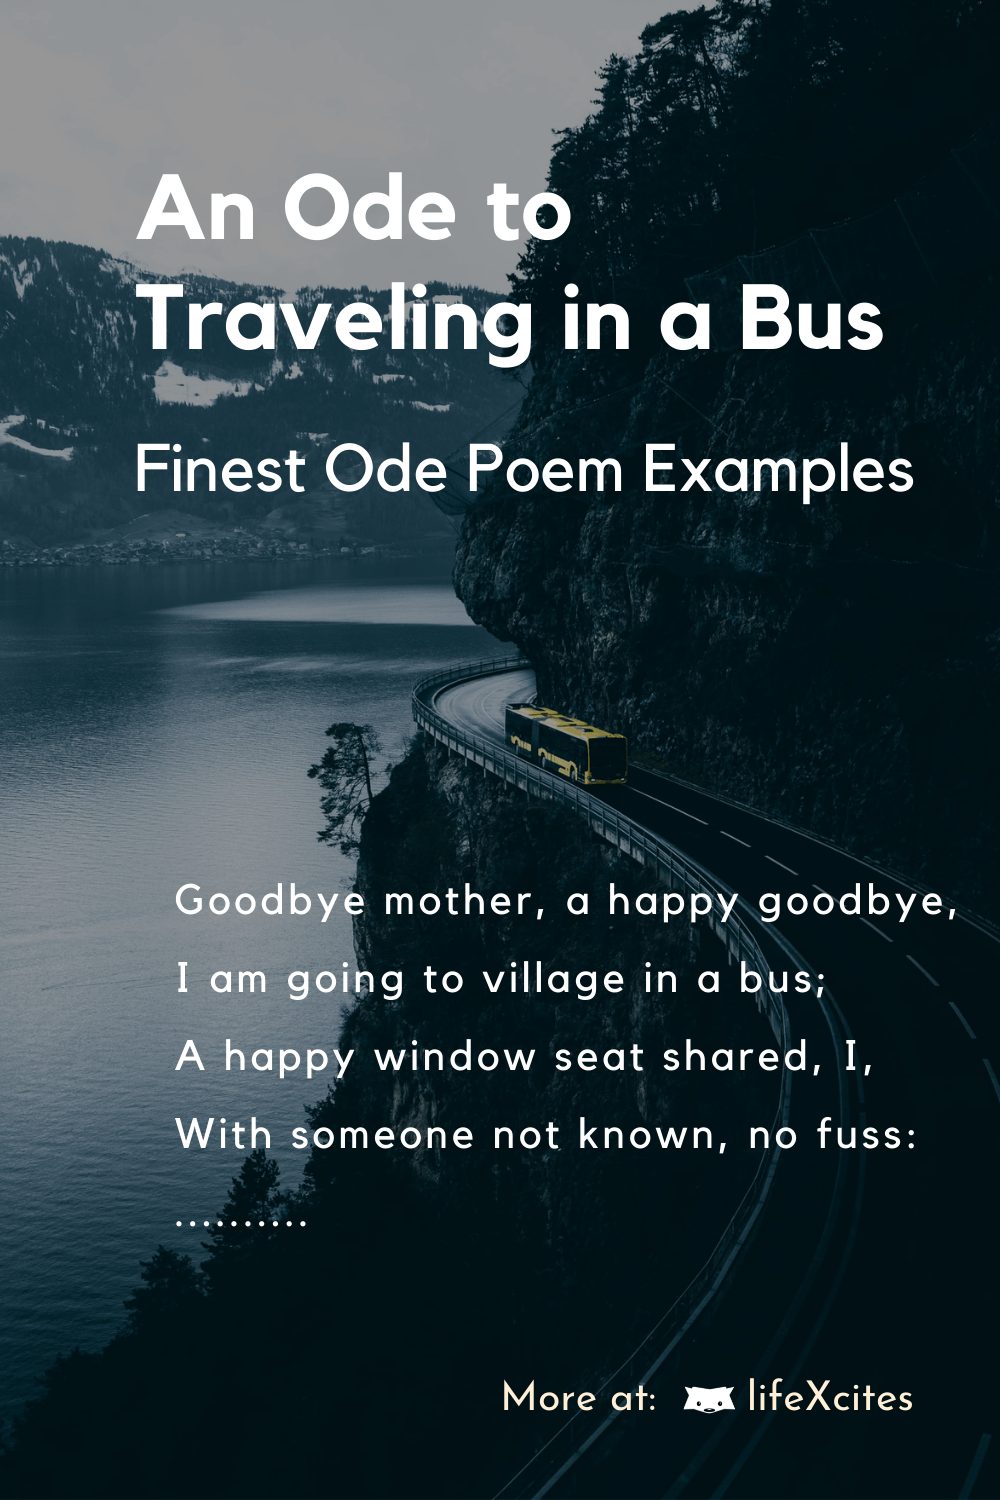 An Ode to Traveling in a Bus – Finest Ode Poem Examples